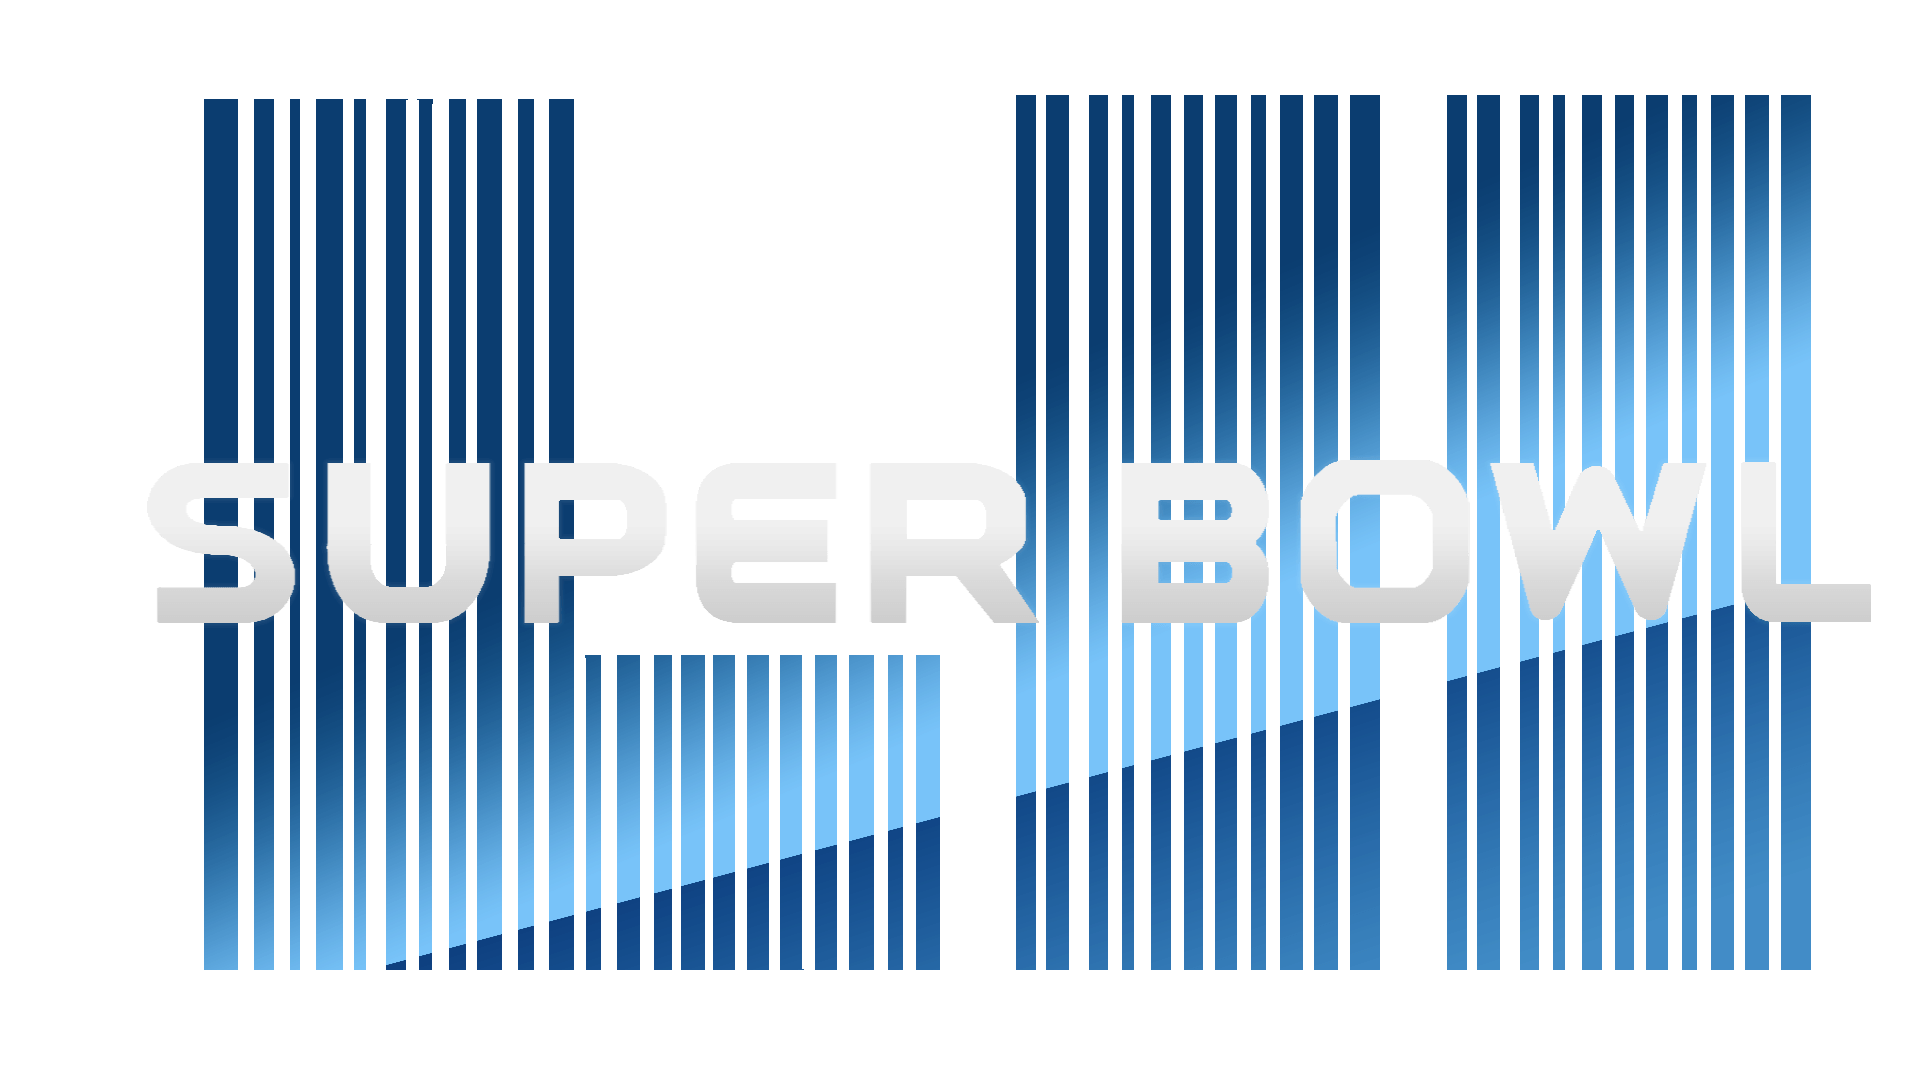 LII Logo - For anyone who wanted it, I recreated the alternate Super Bowl LII